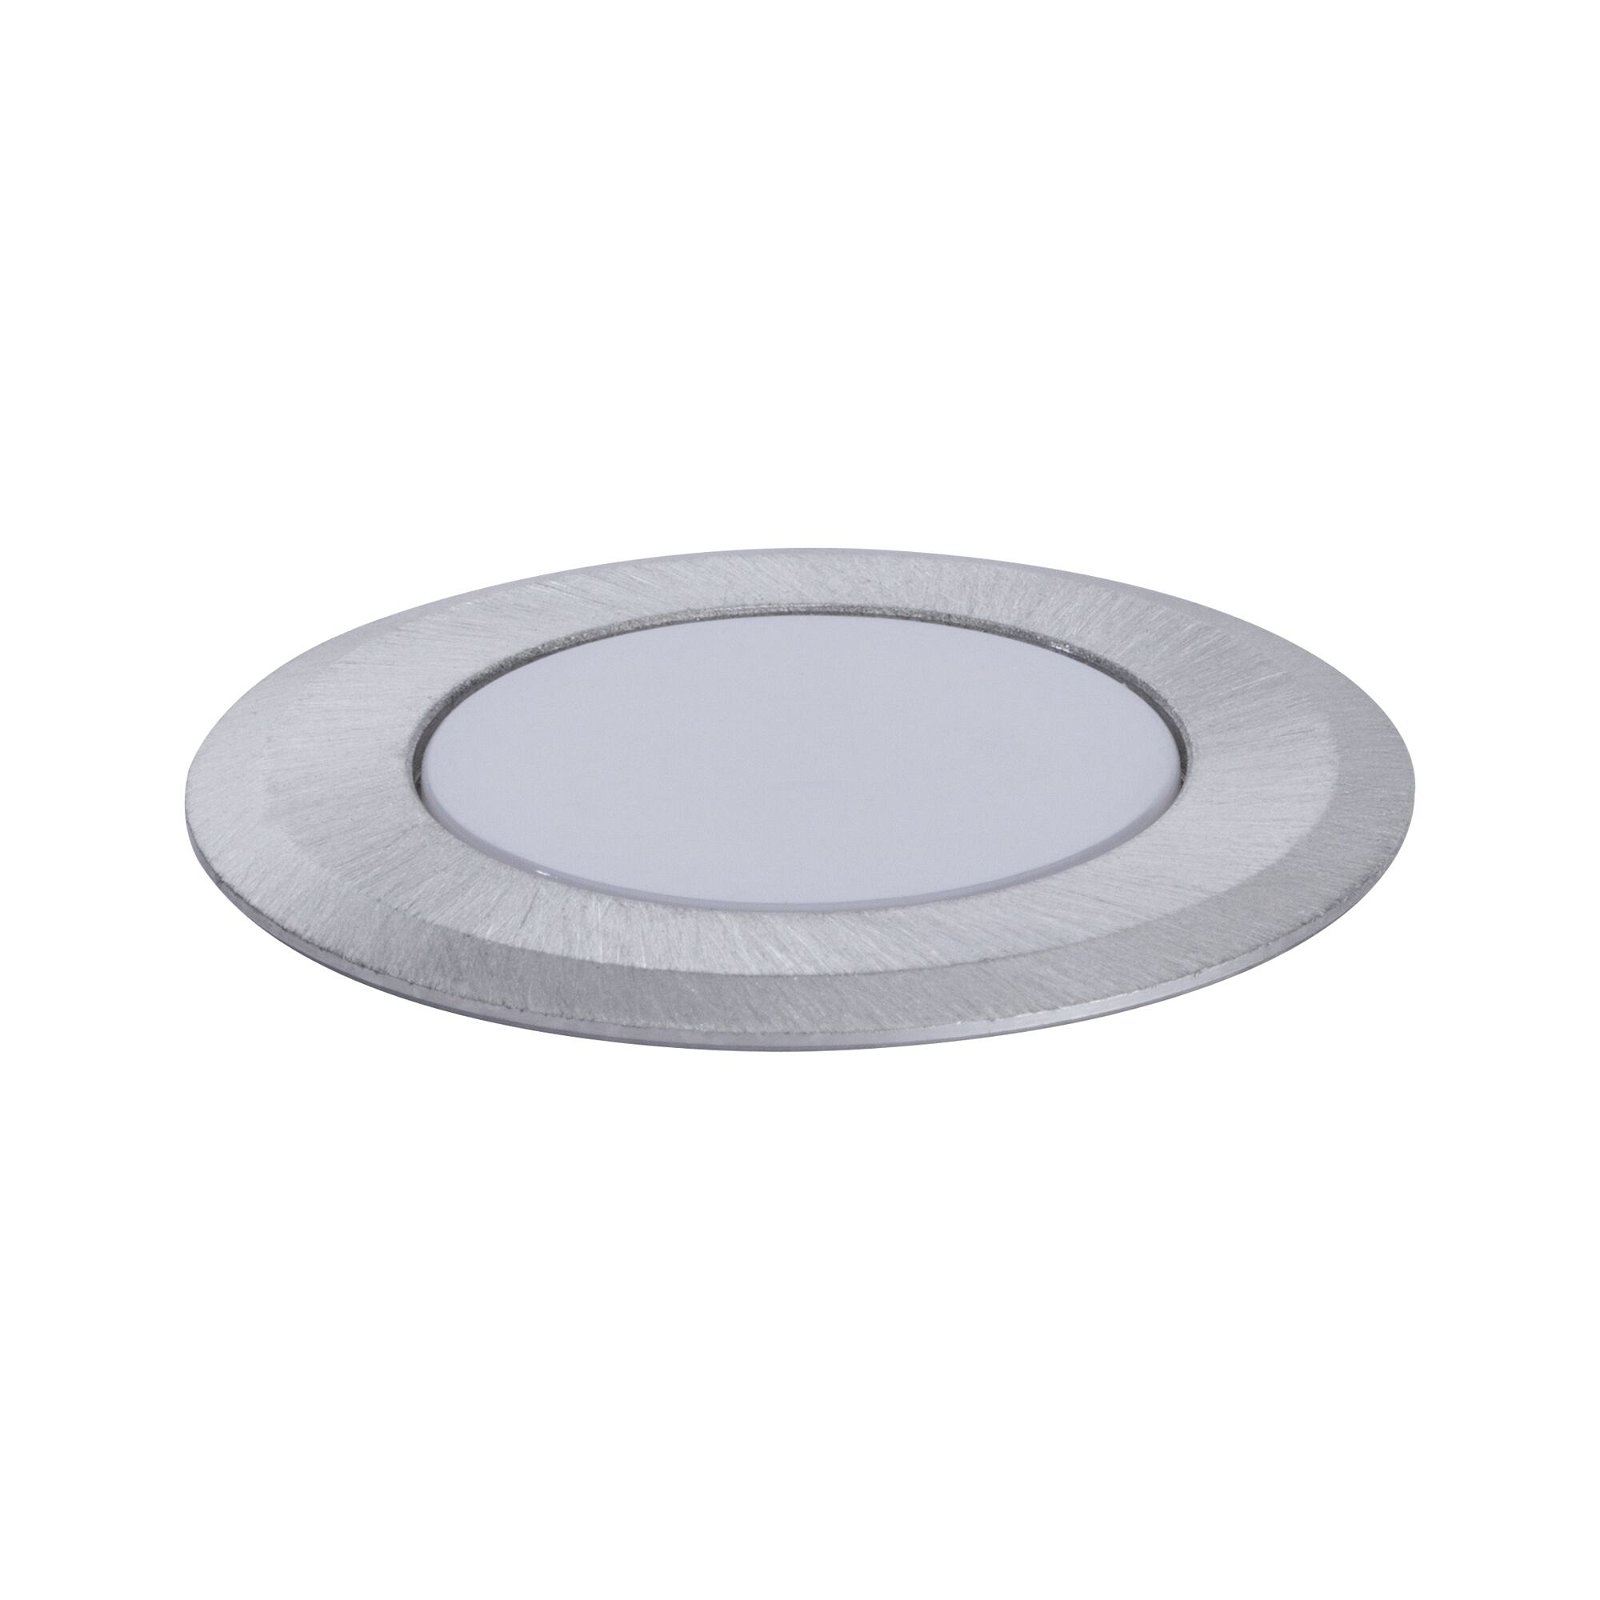 LED Recessed floor luminaire Gold light insect friendly IP67 round 50mm 2200K 2,2W 60lm 230V Aluminium Plastic/Metal